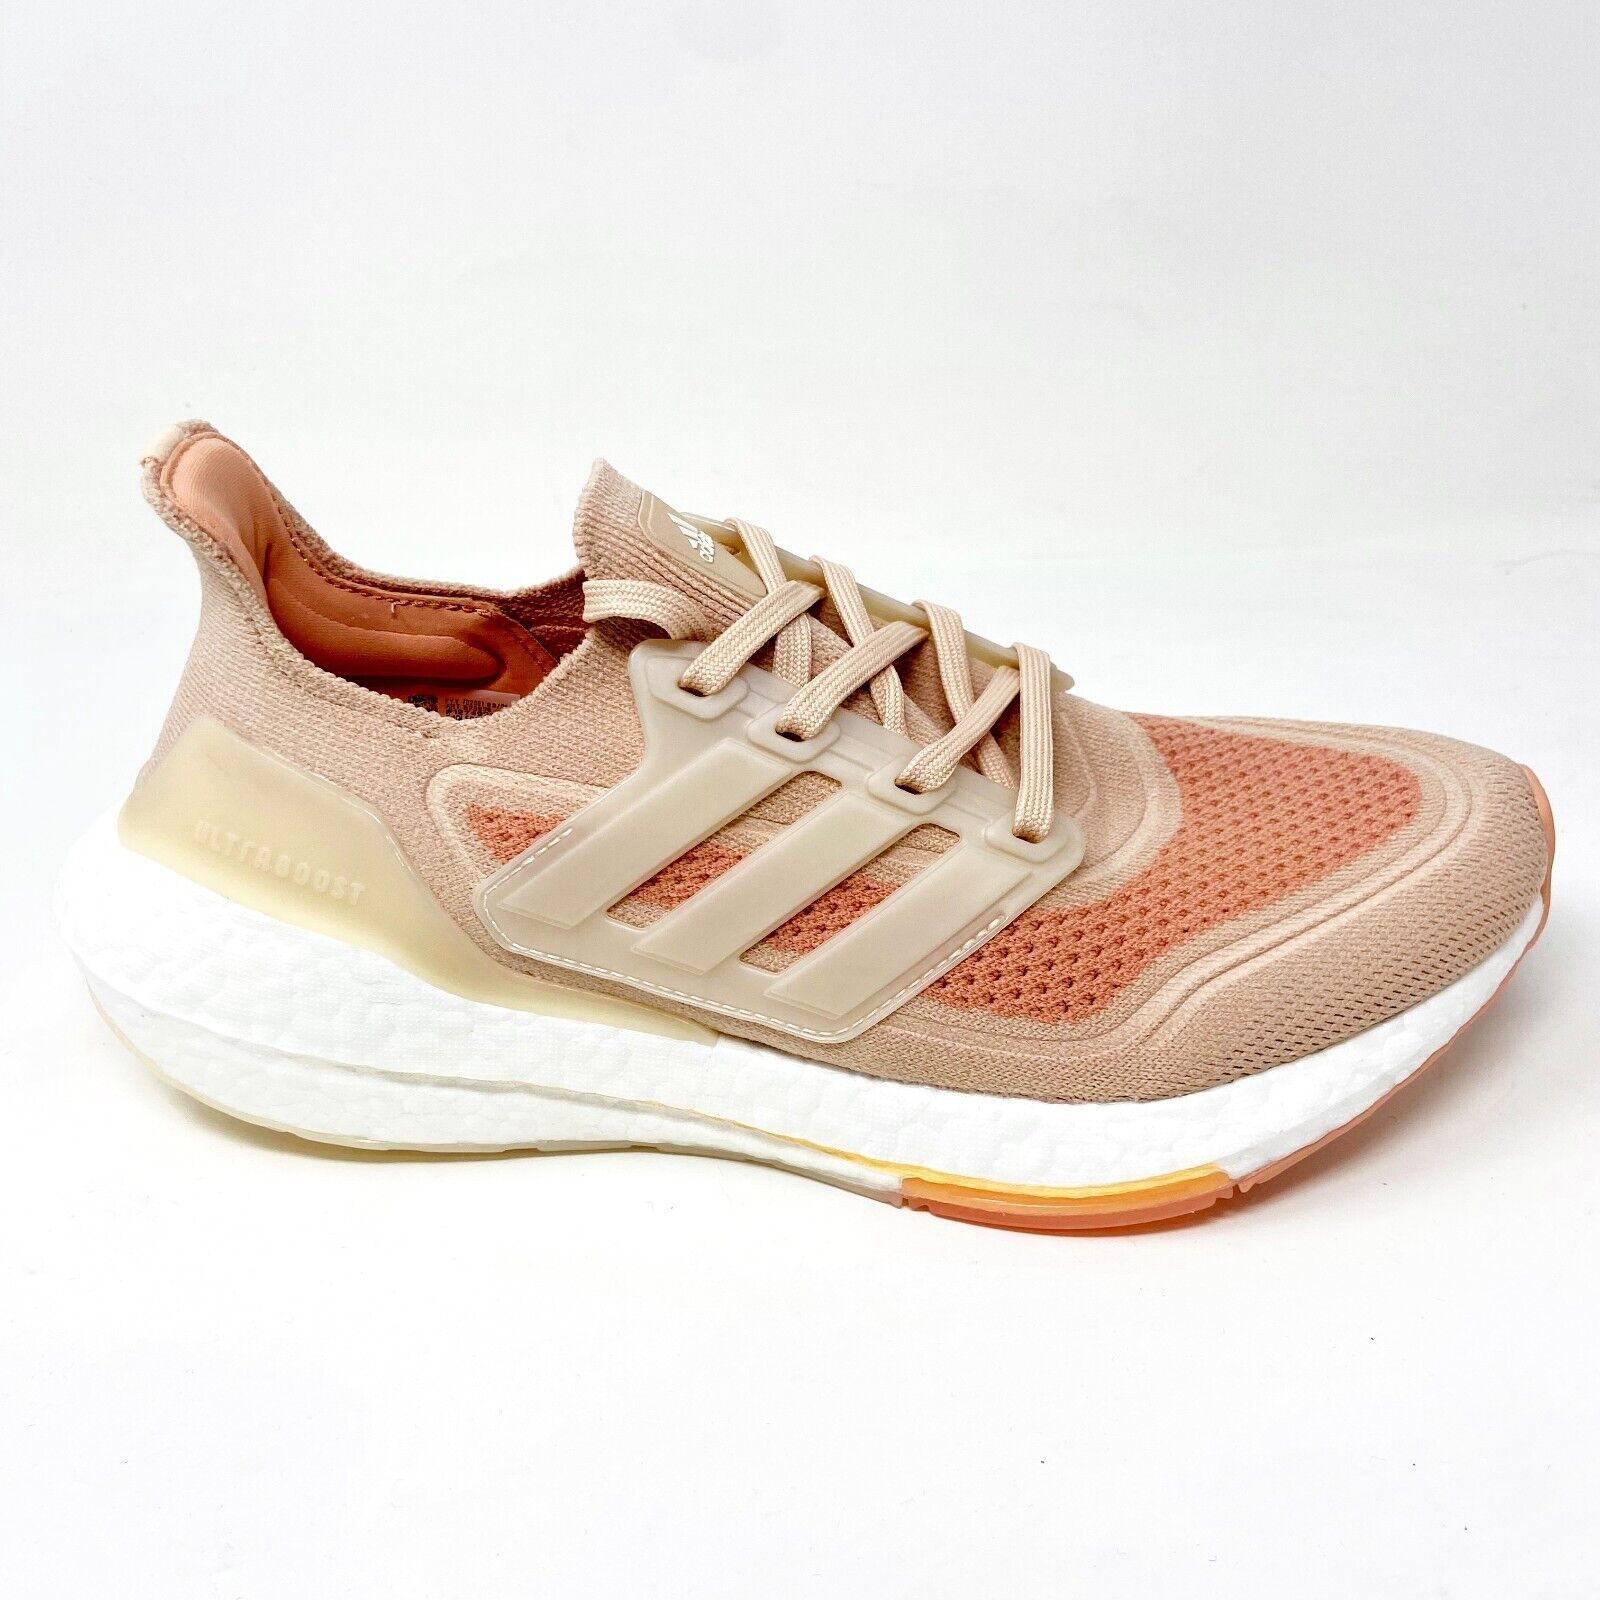 Adidas Ultraboost 21 Halo Blush Pink Womens Running Shoes S23838